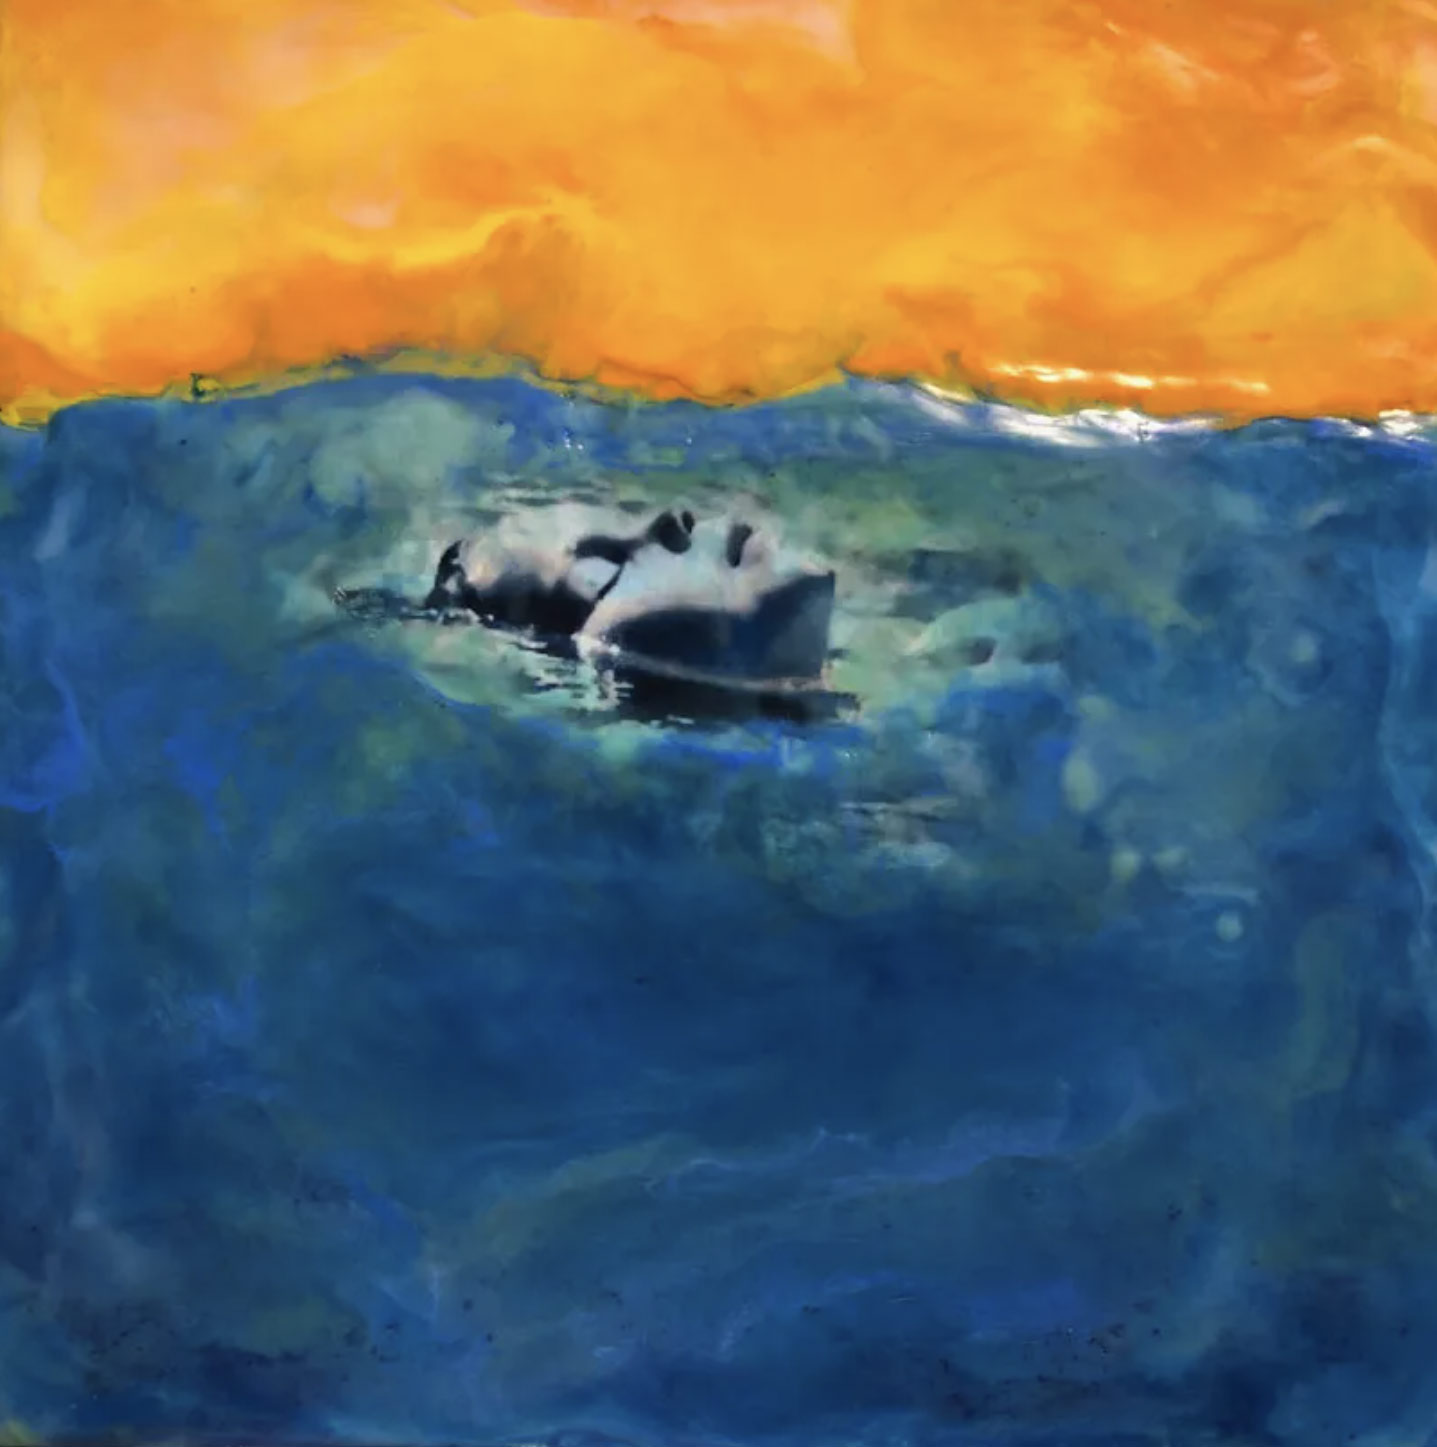 Encaustic work of a child's face floating in blue water with an orange and yellow sky.